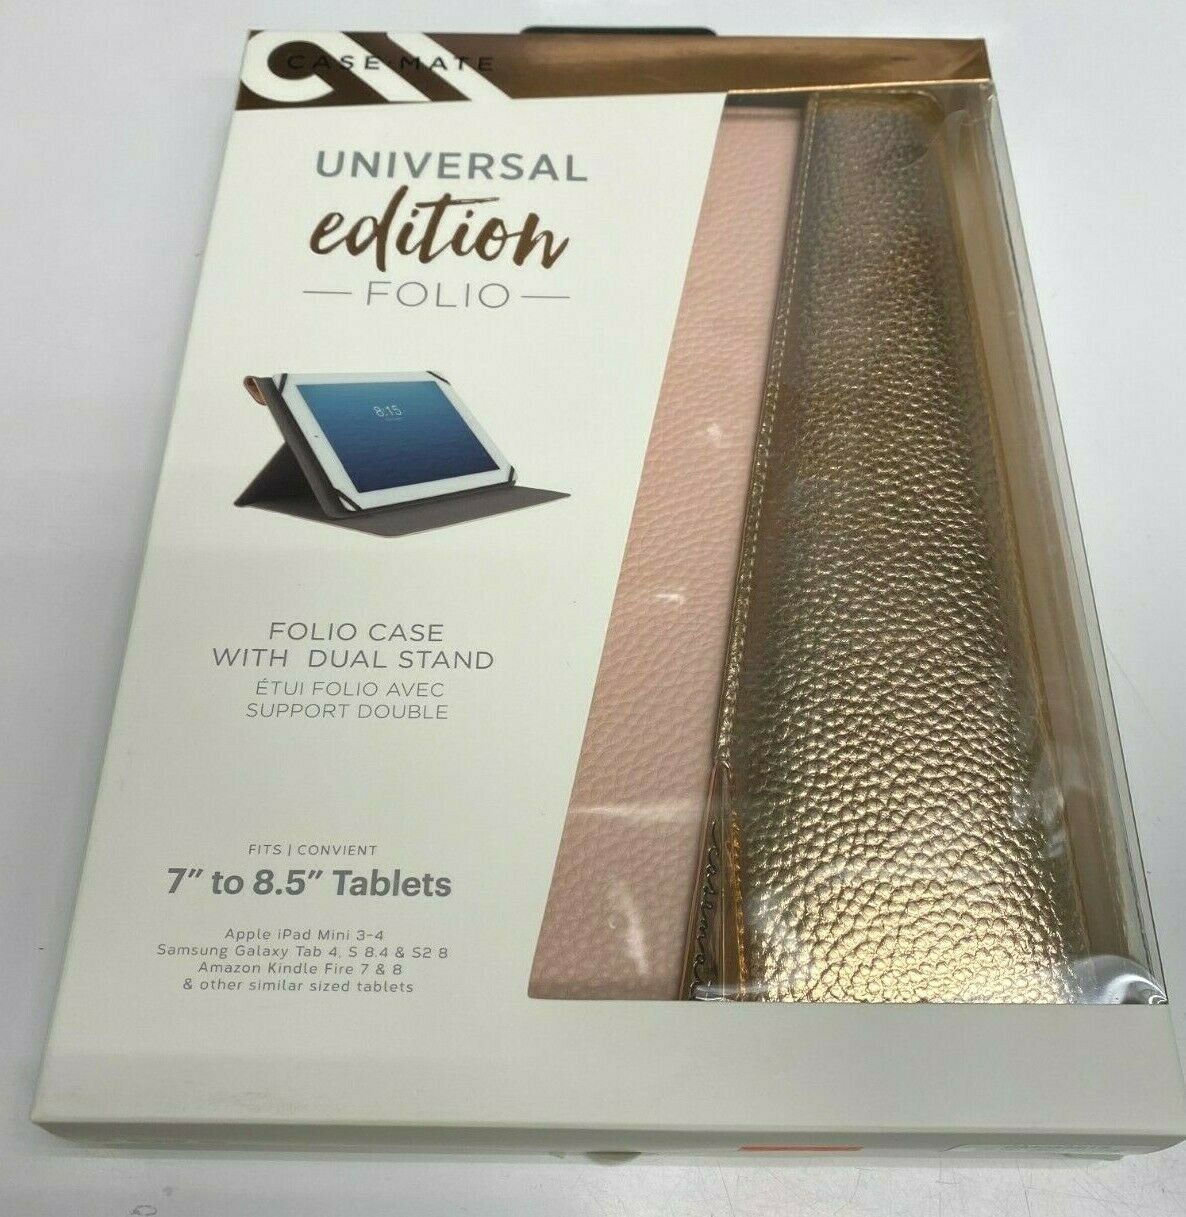 Case Mate Universal Edition Folio Case w/ Stand for 7" to 8.5" Tablets